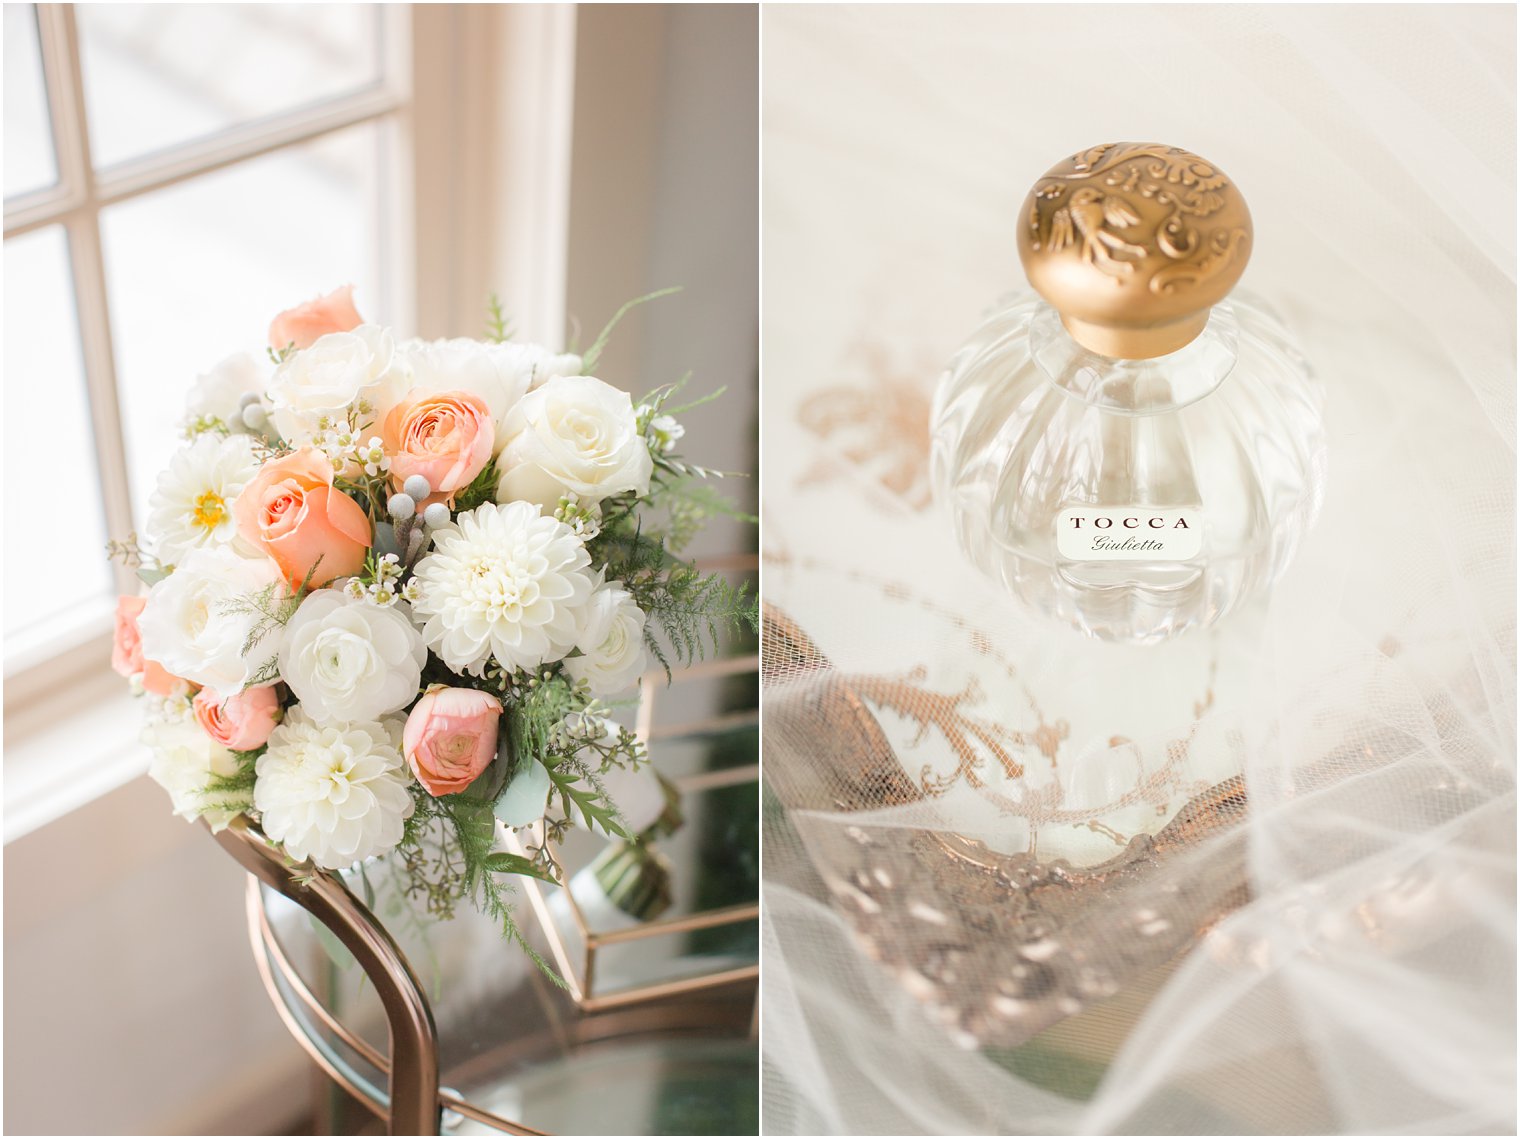 peach rose and white bouquet by Entenmann's Florist photographed by Idalia Photography